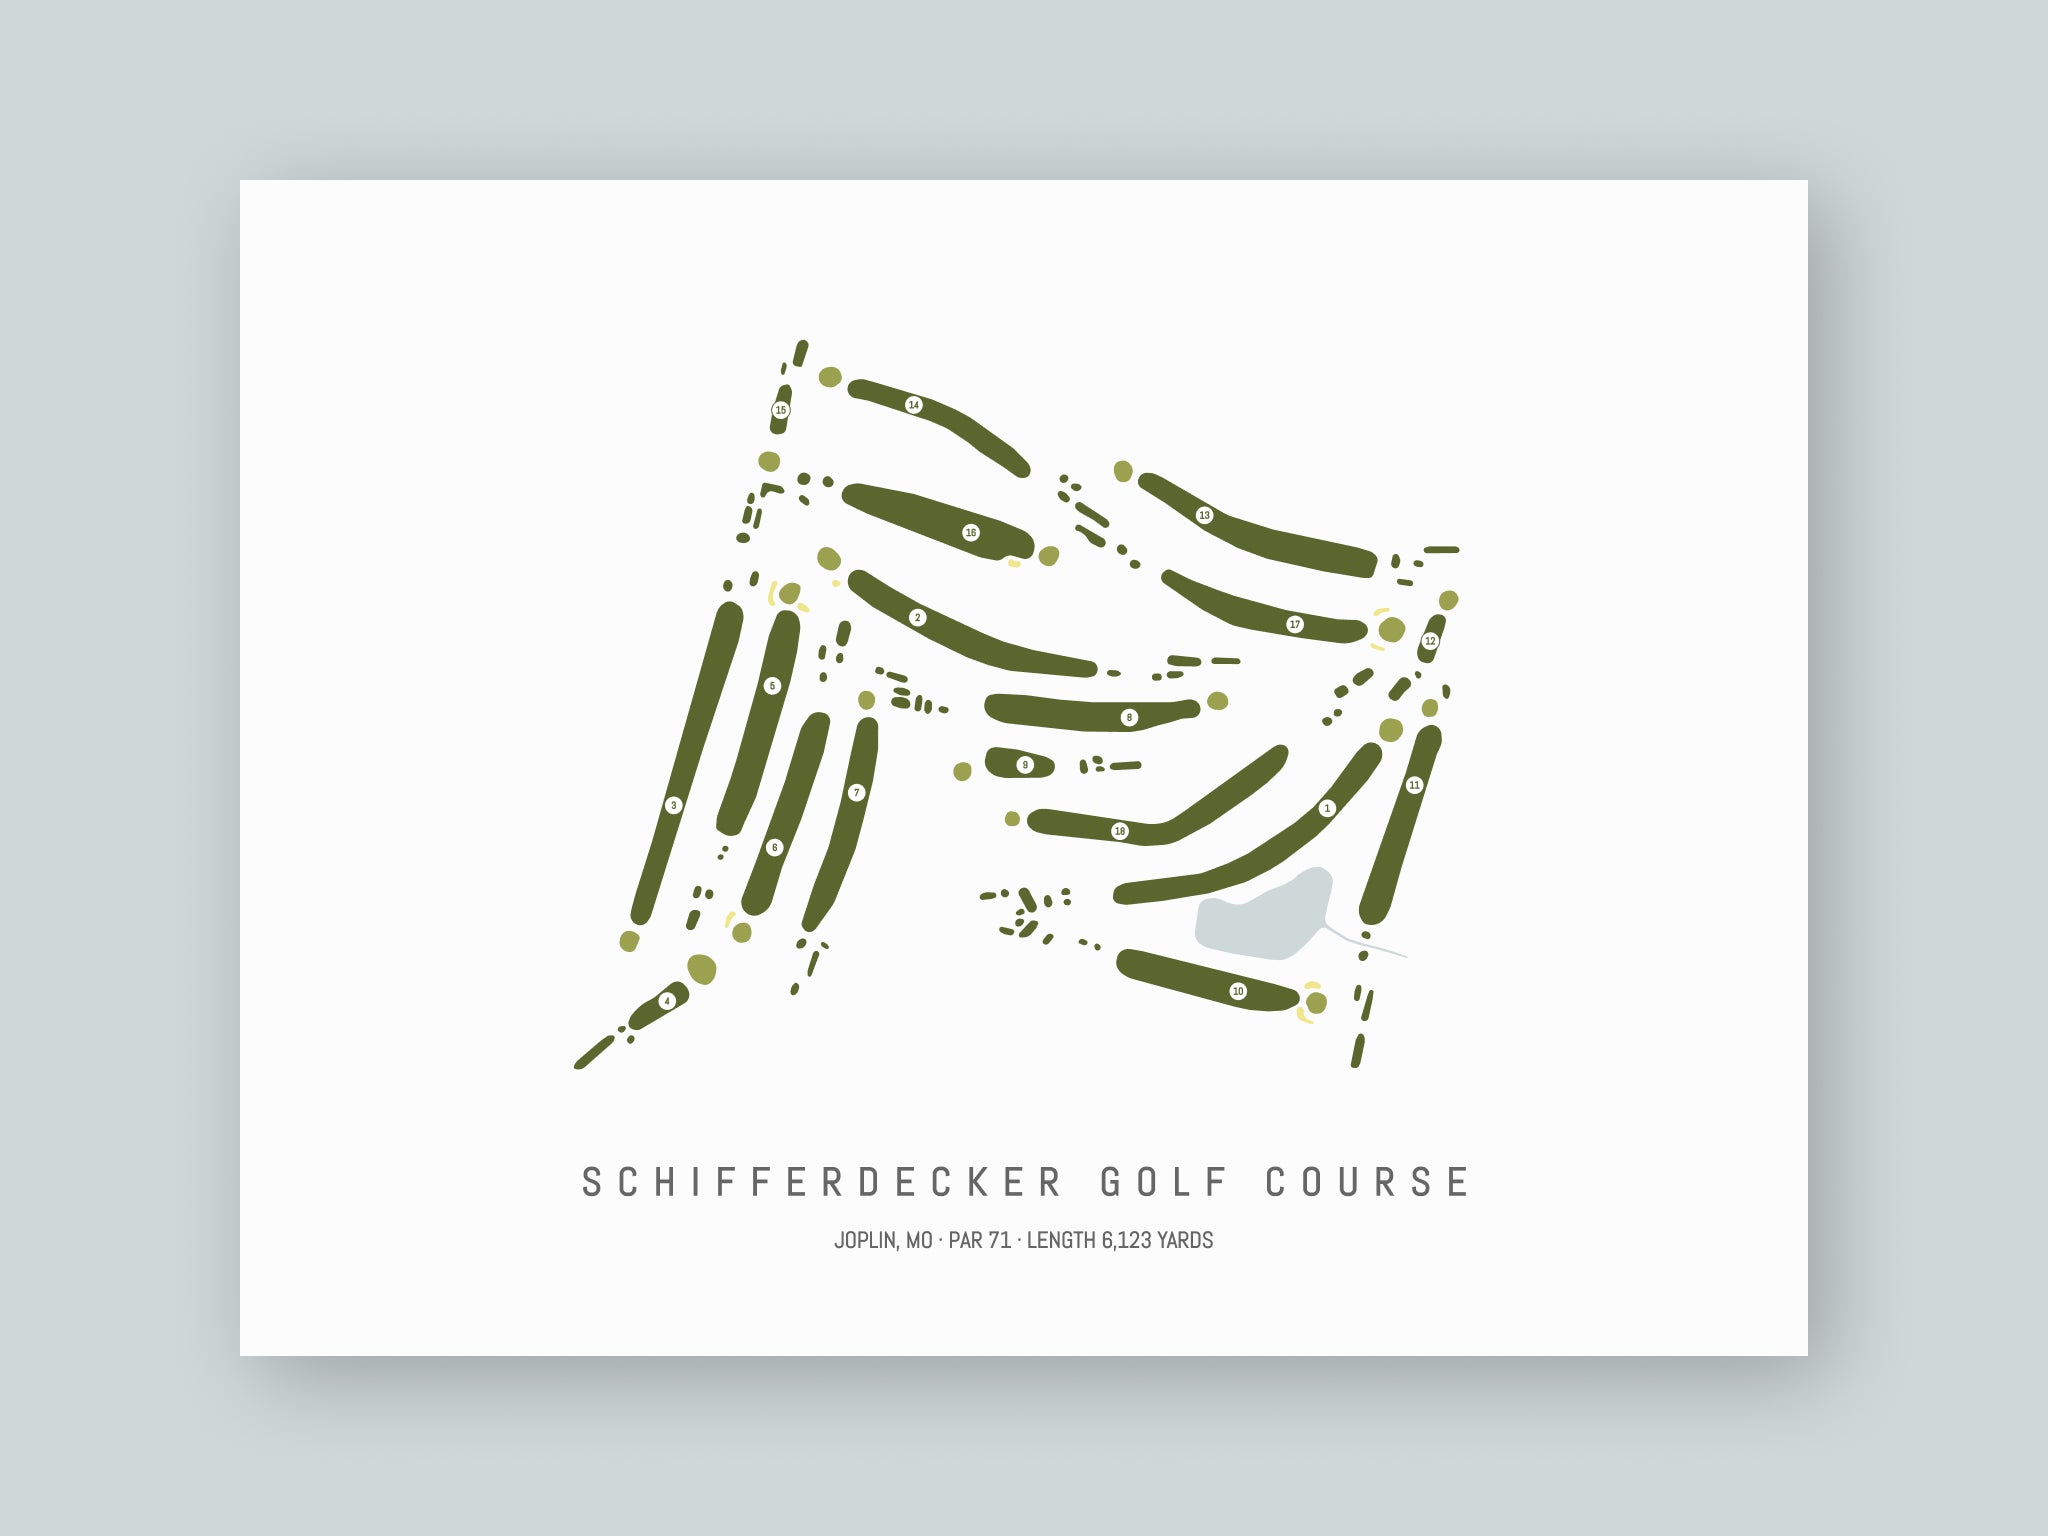 Schifferdecker-Golf-Course-MO--Unframed-24x18-With-Hole-Numbers